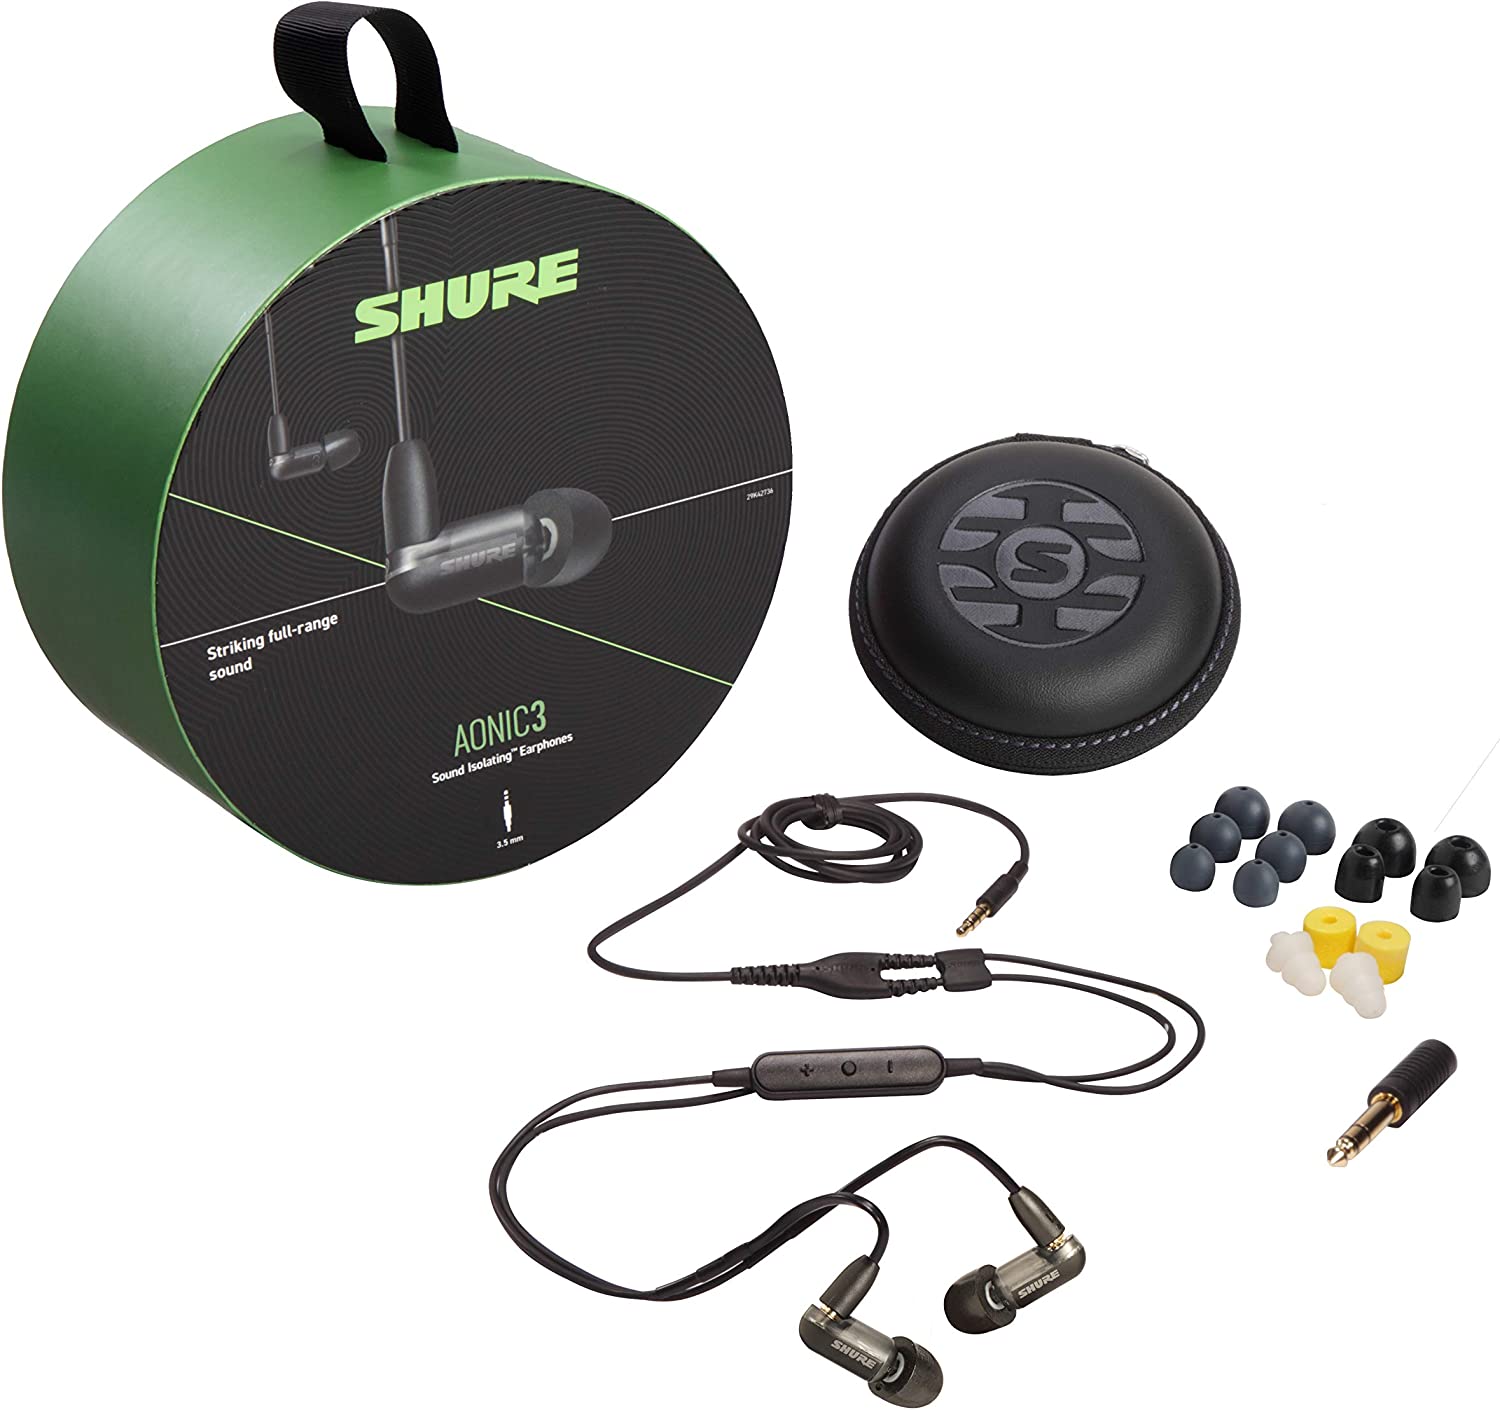 Shure Aonic 3 Black Friday